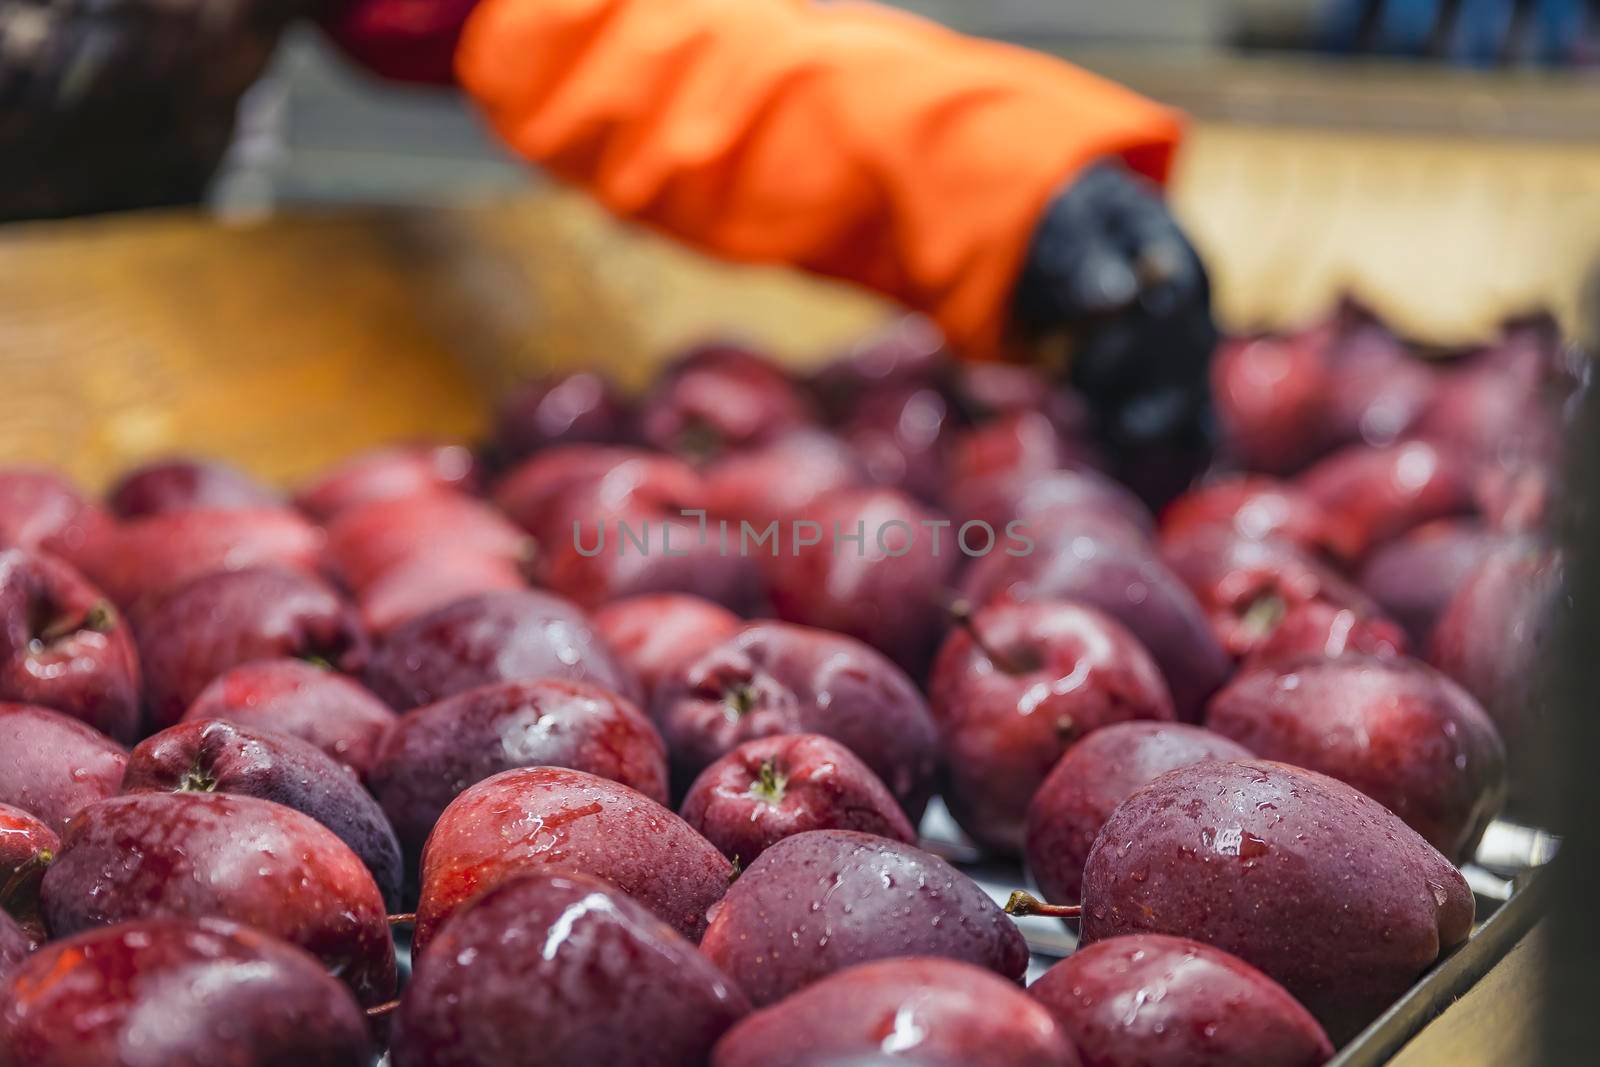 quality control of apples at the factory by zokov